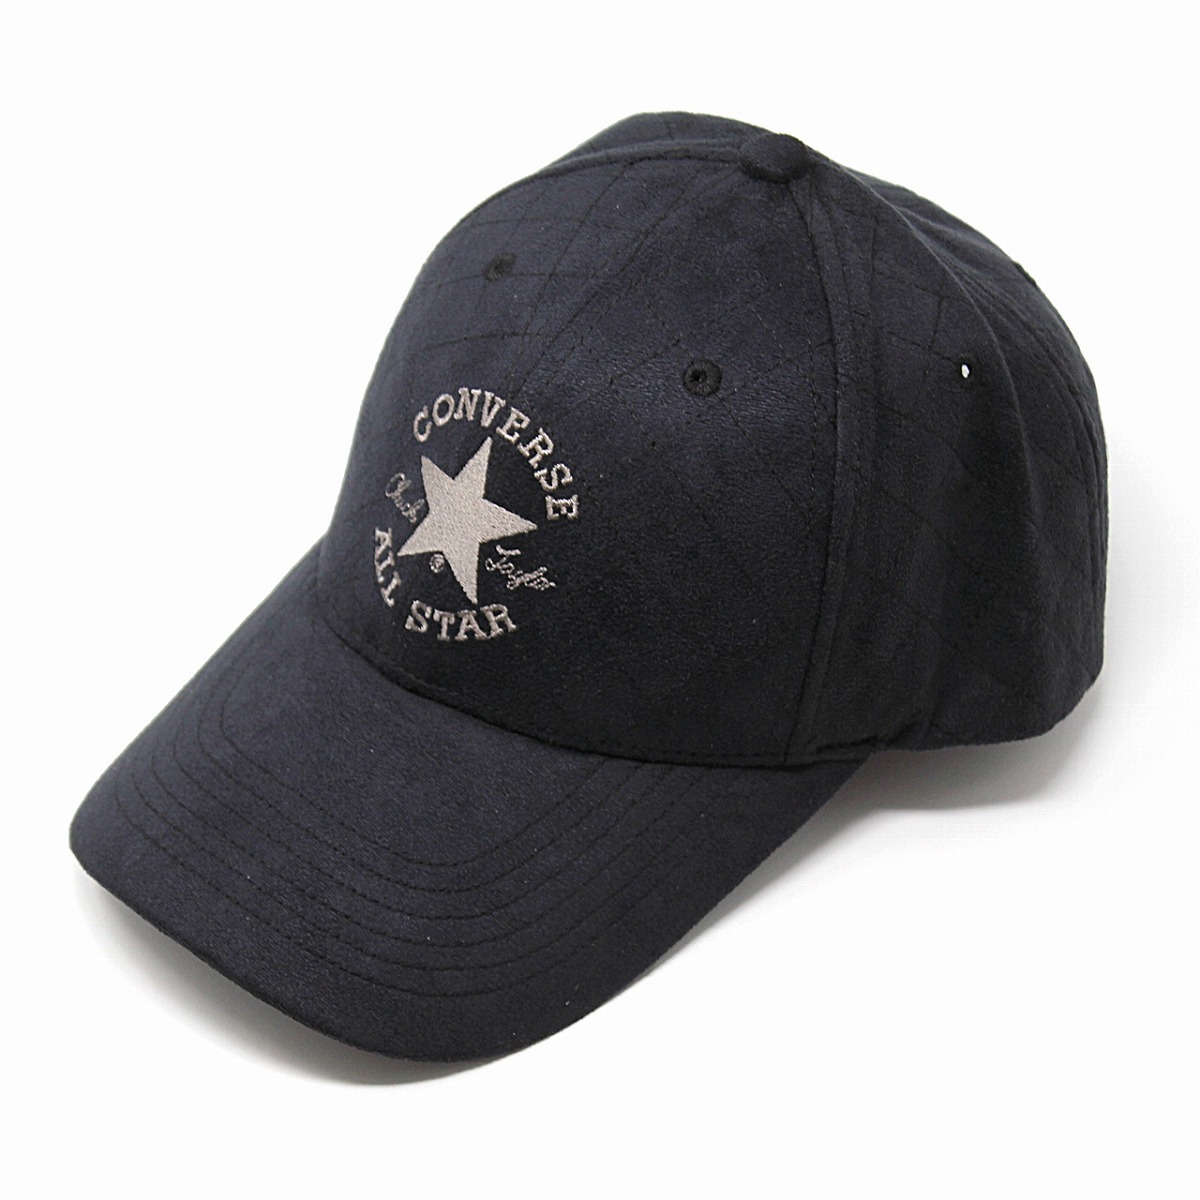 converse one star hat